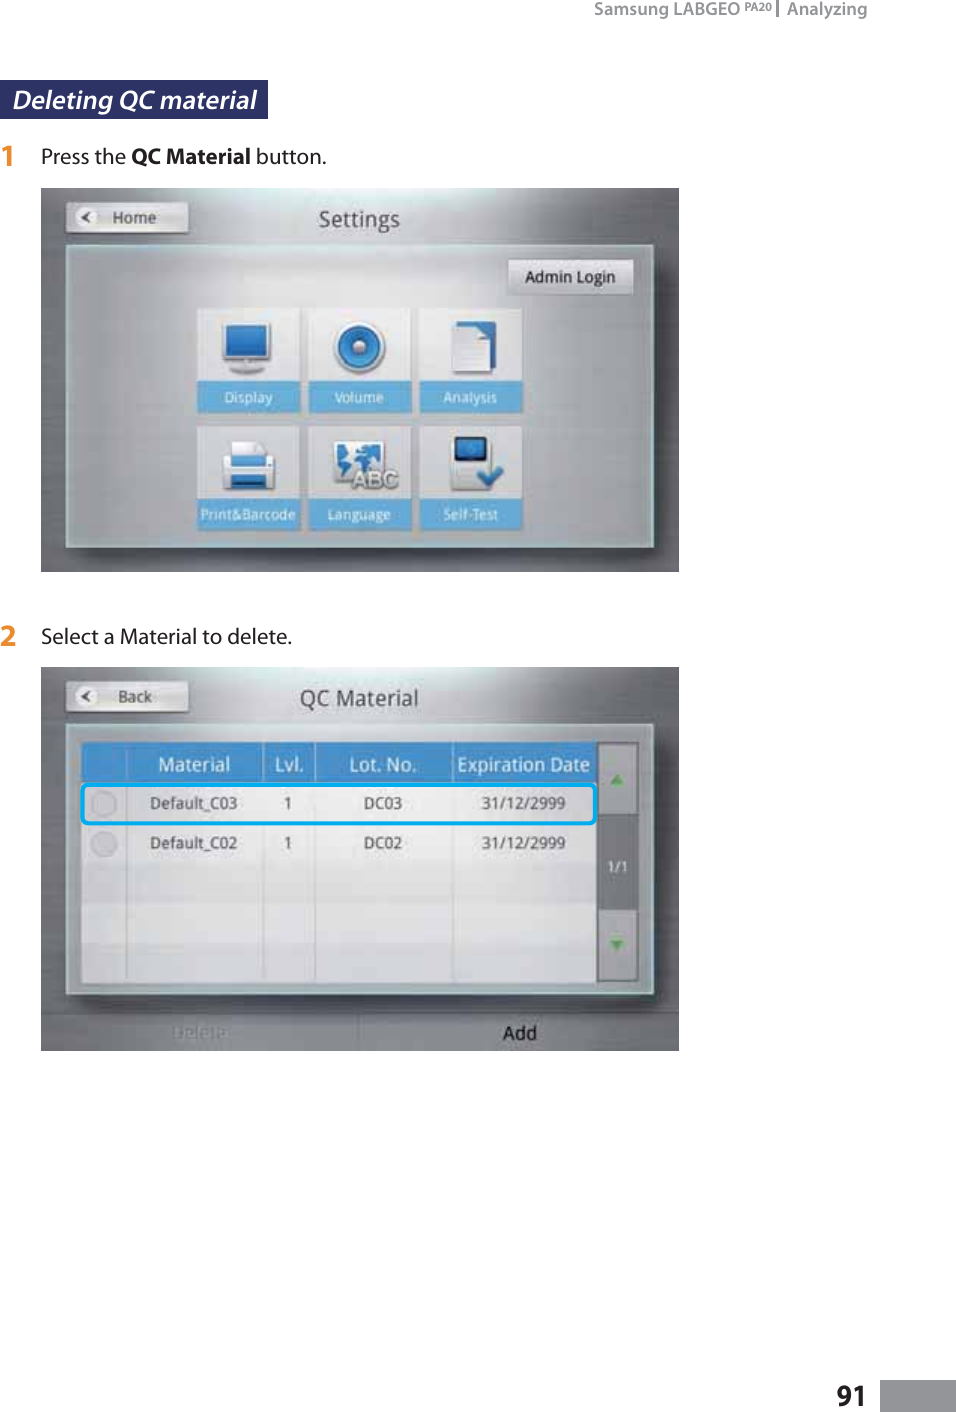 91Samsung LABGEO PA20   AnalyzingDeleting QC material 1  Press the QC Material button.2  Select a Material to delete. 